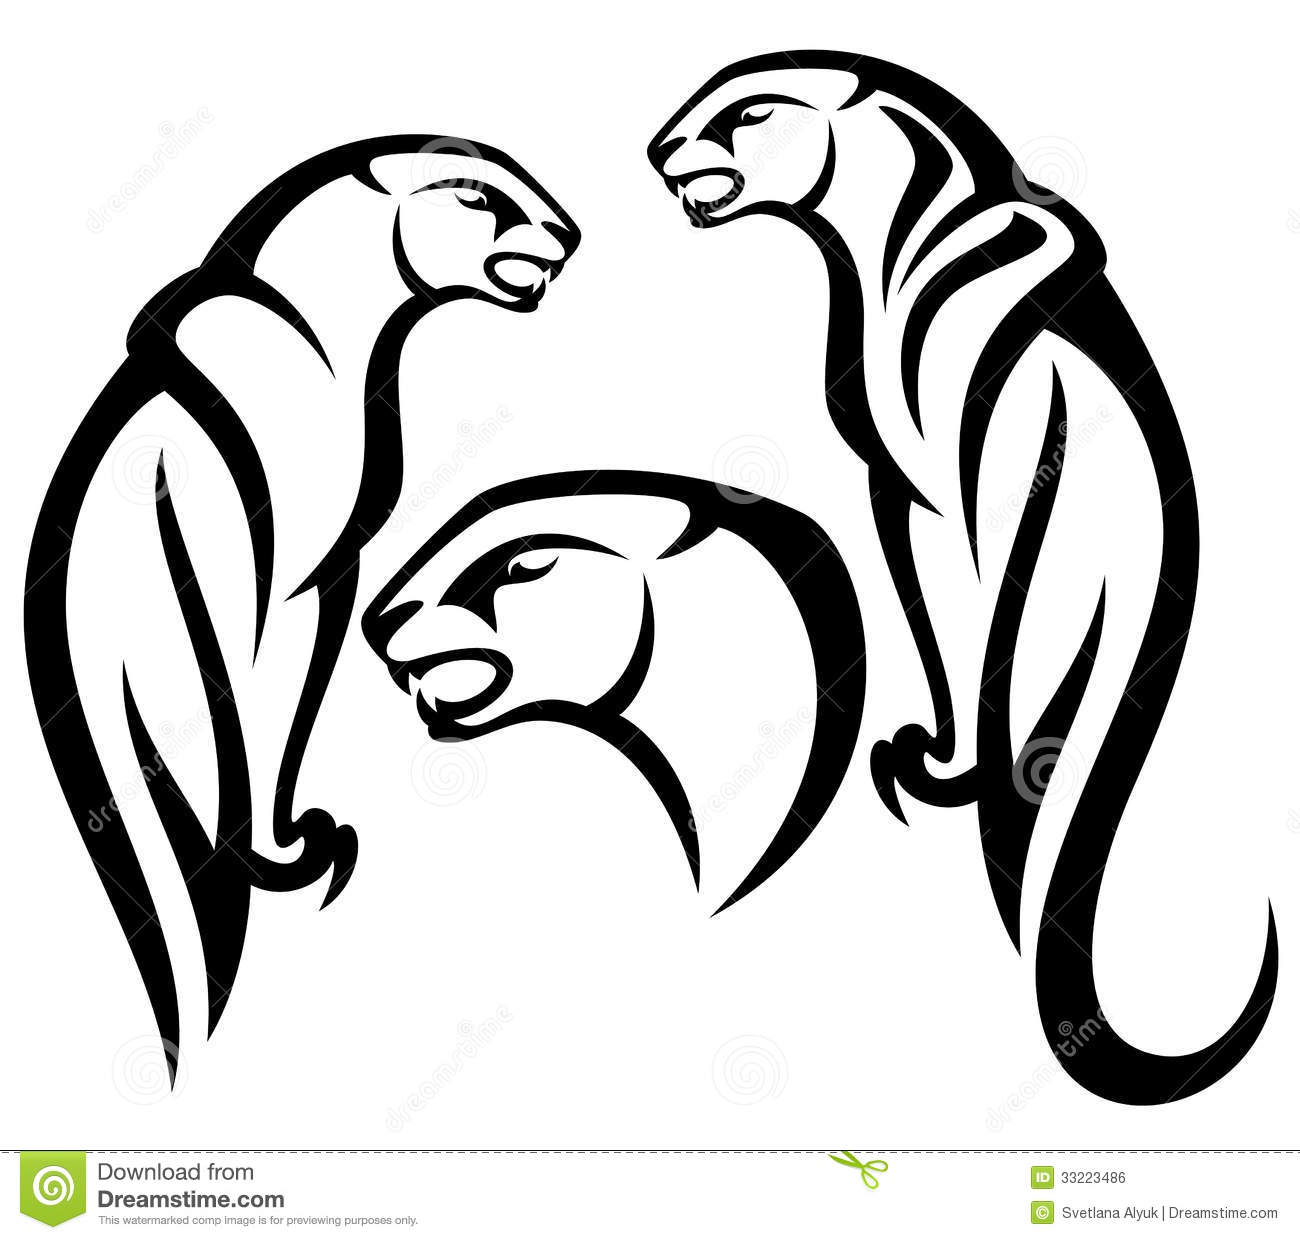 Panther Vector Royalty Free Stock Image   Image  33223486